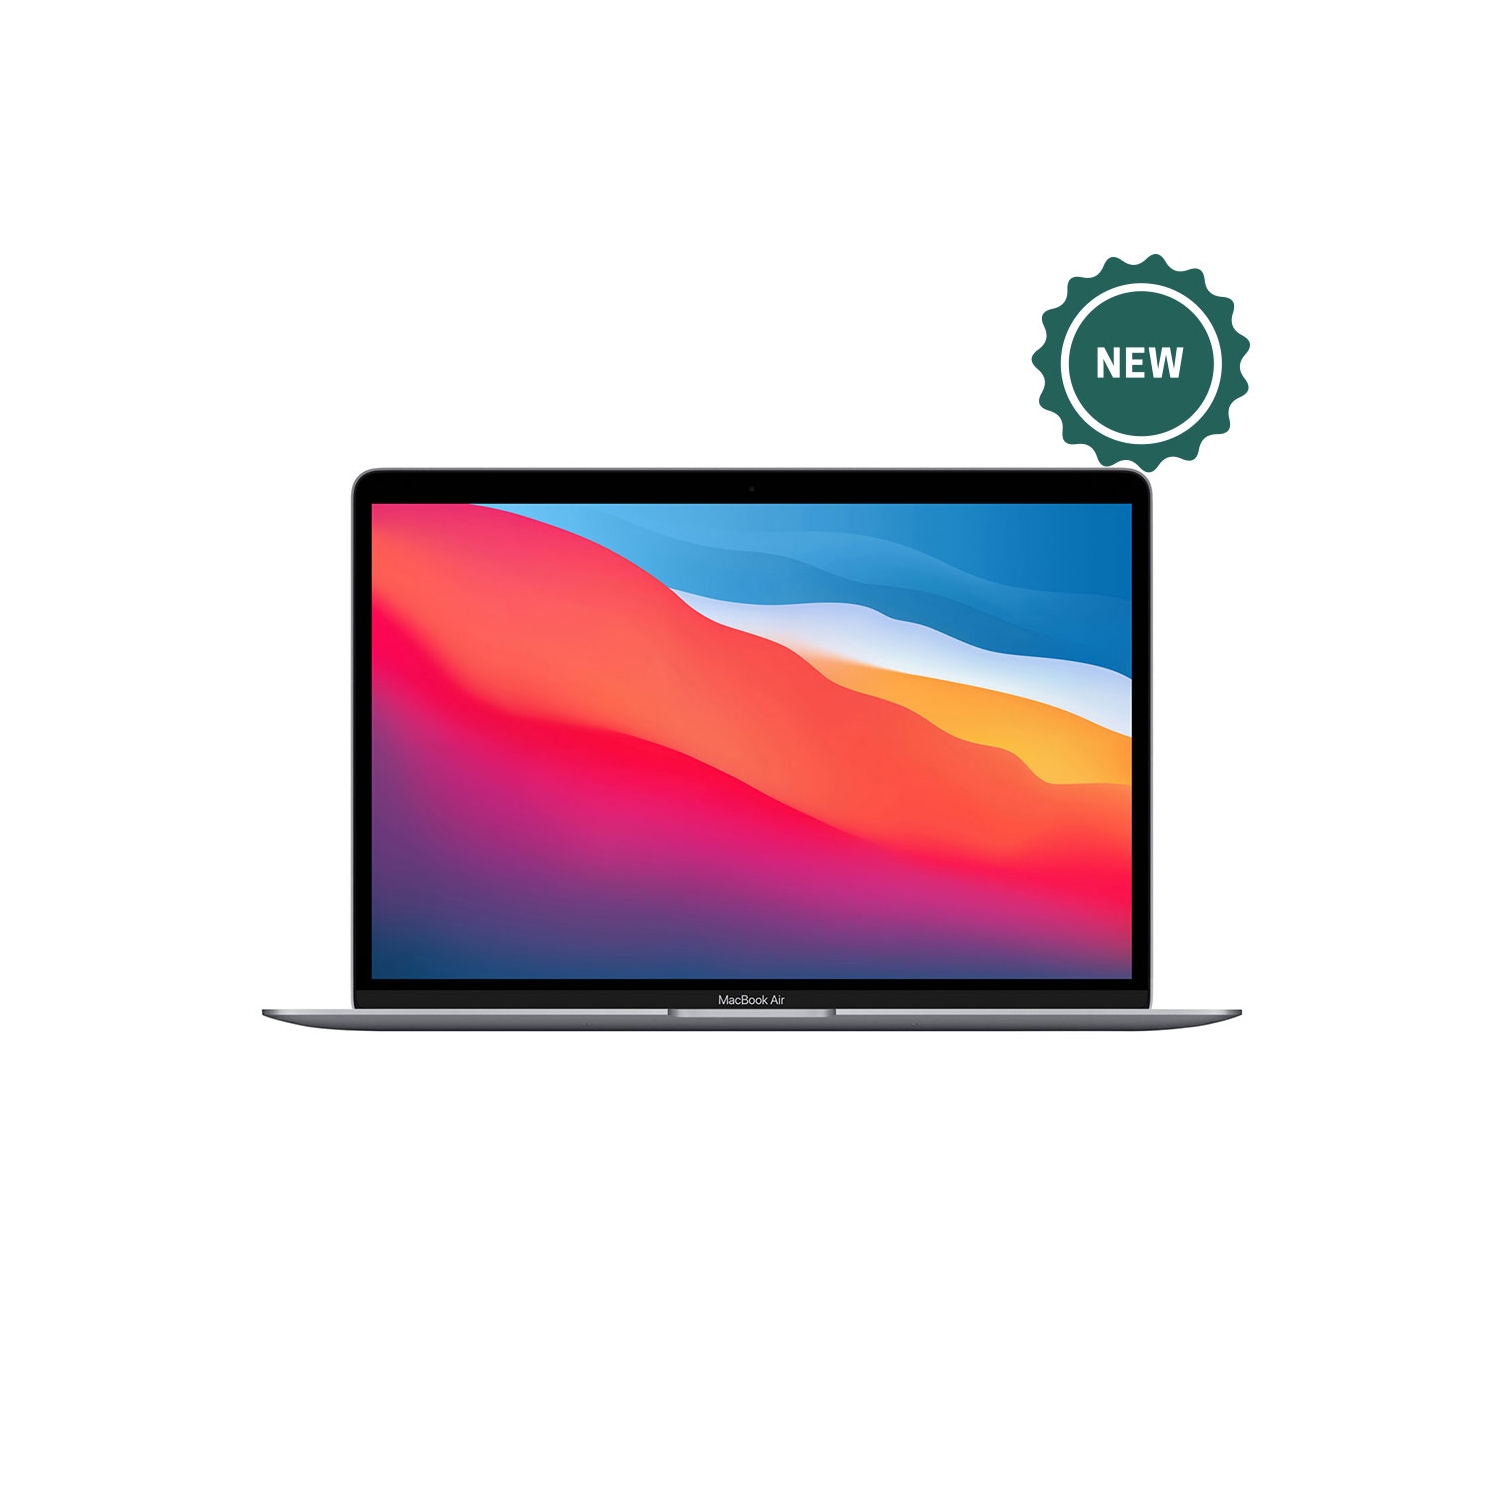 Apple MacBook Air 13.3" with Touch ID (Fall 2020) (Apple M1 Chip / 8GB RAM / 512GB SSD / Space Gray) - English (AppleCare+ Expires NOVEMBER 2024) - Brand New